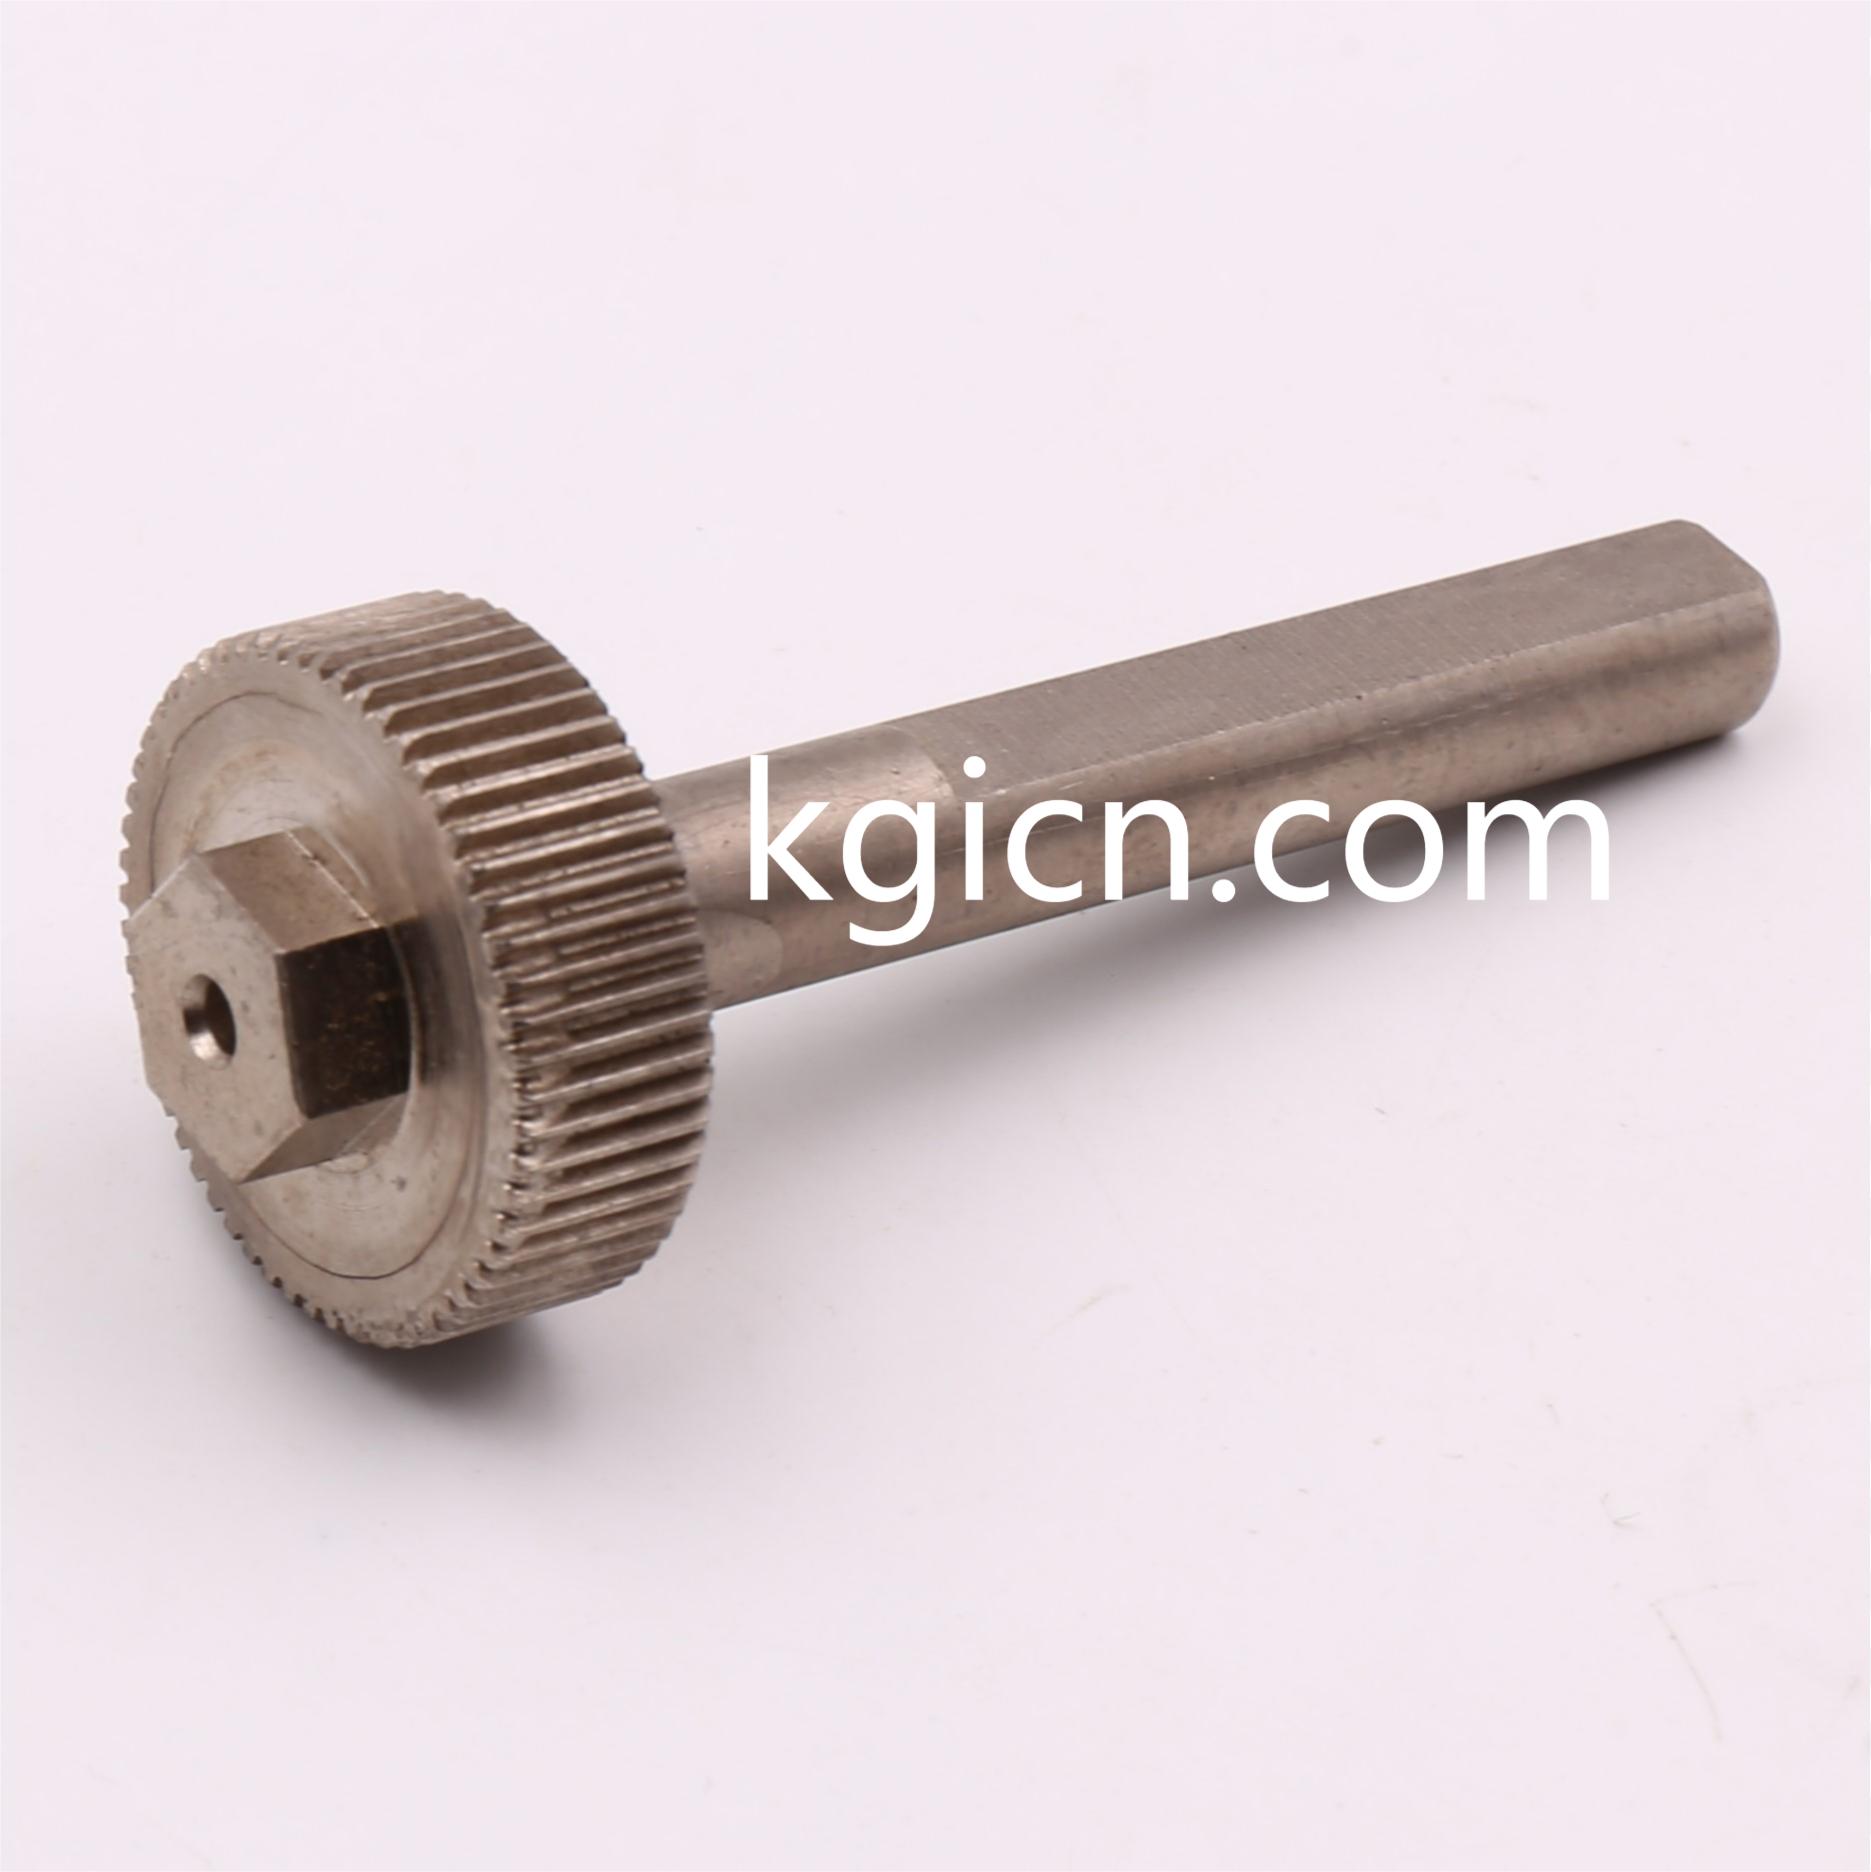 Carburizing spur gear drive with metal shaft